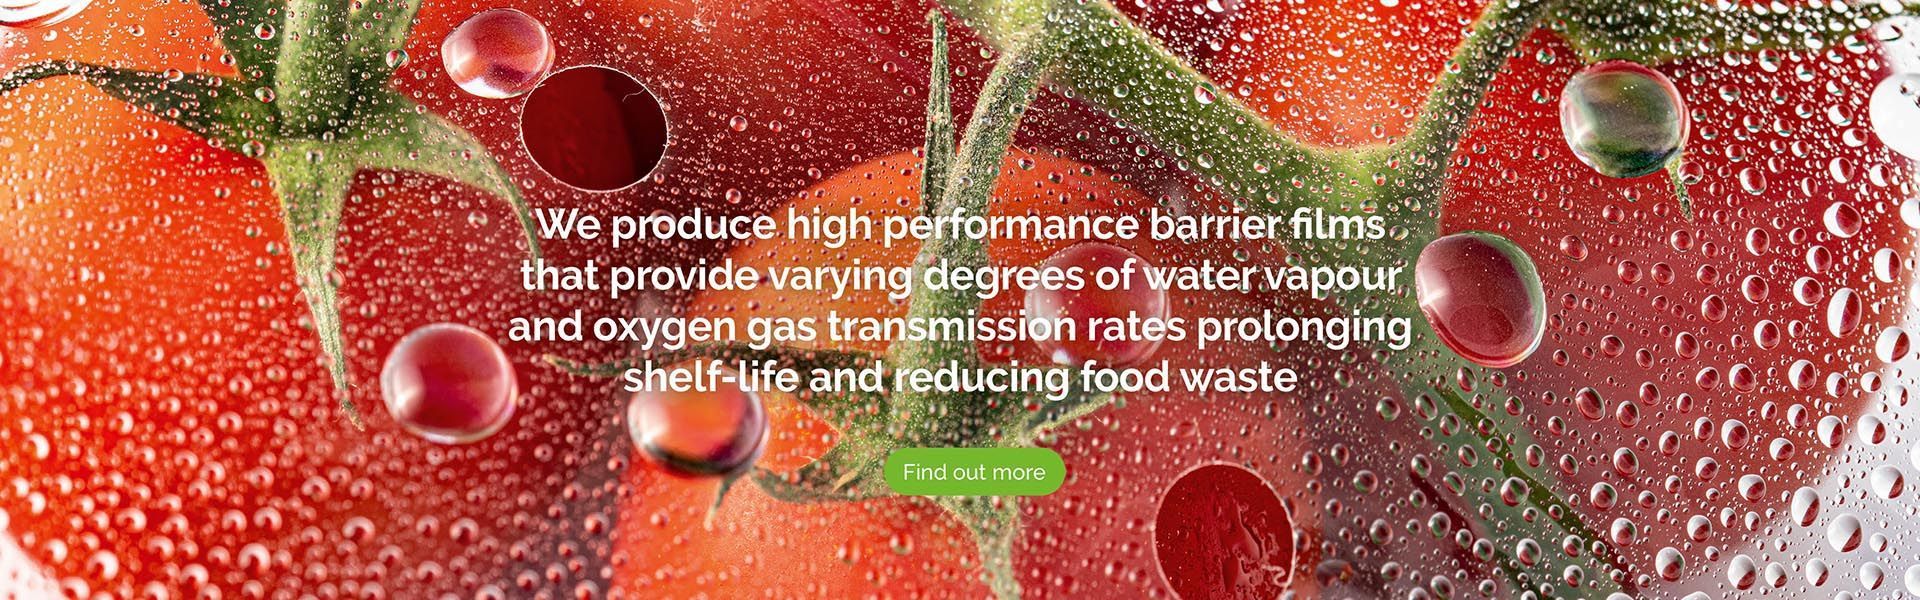 a tomato with water drops on it that says we produce high performance barrier films